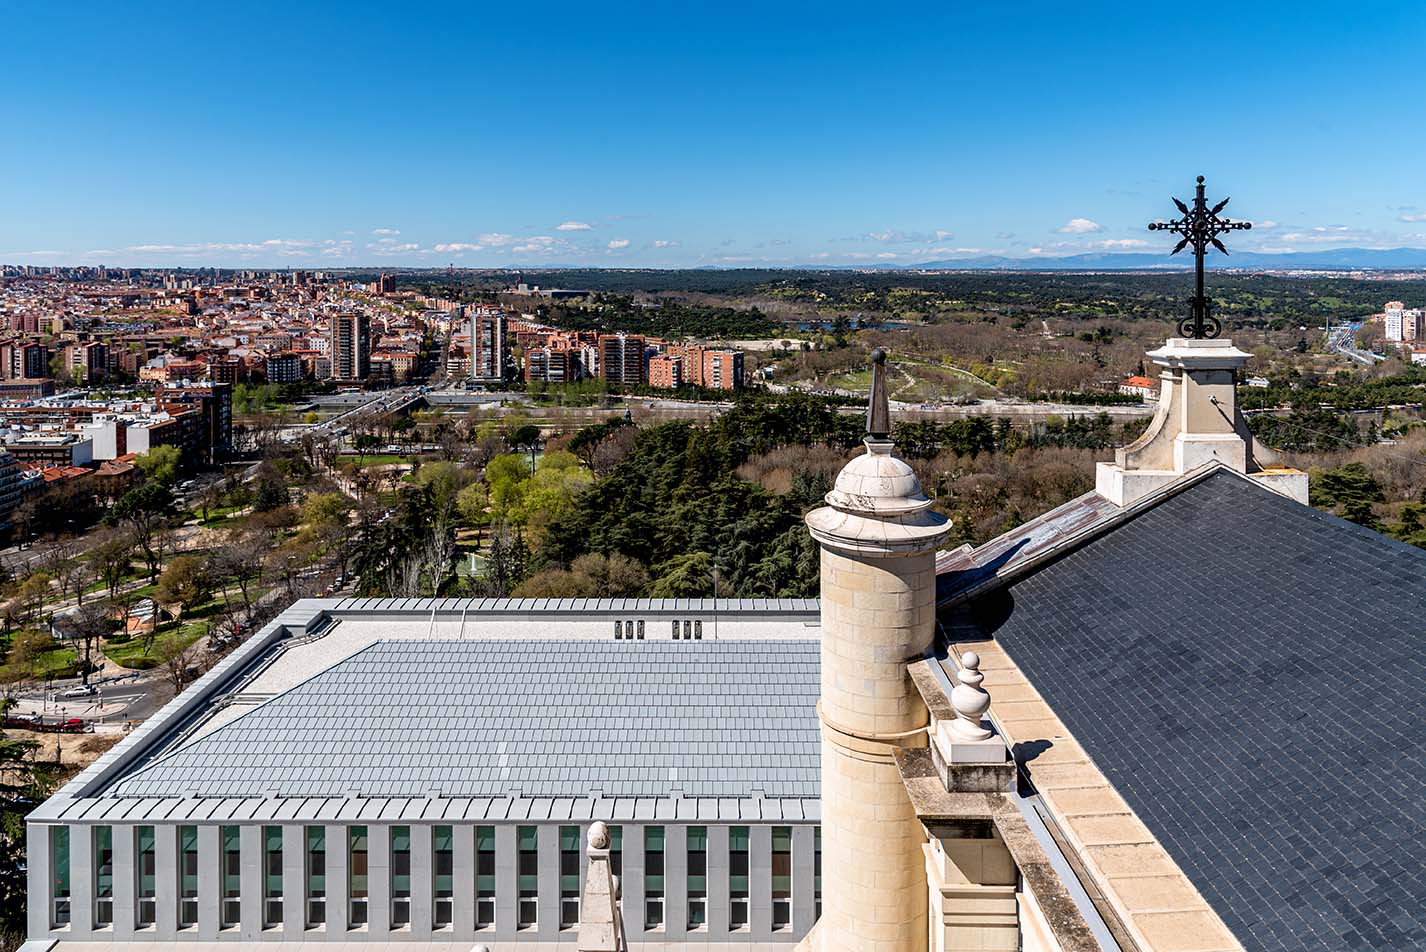 Aerial View of Casa de Campo and Carabanchel District in Madrid from Almudena Cathedral. Cityscape of Madrid, Spain